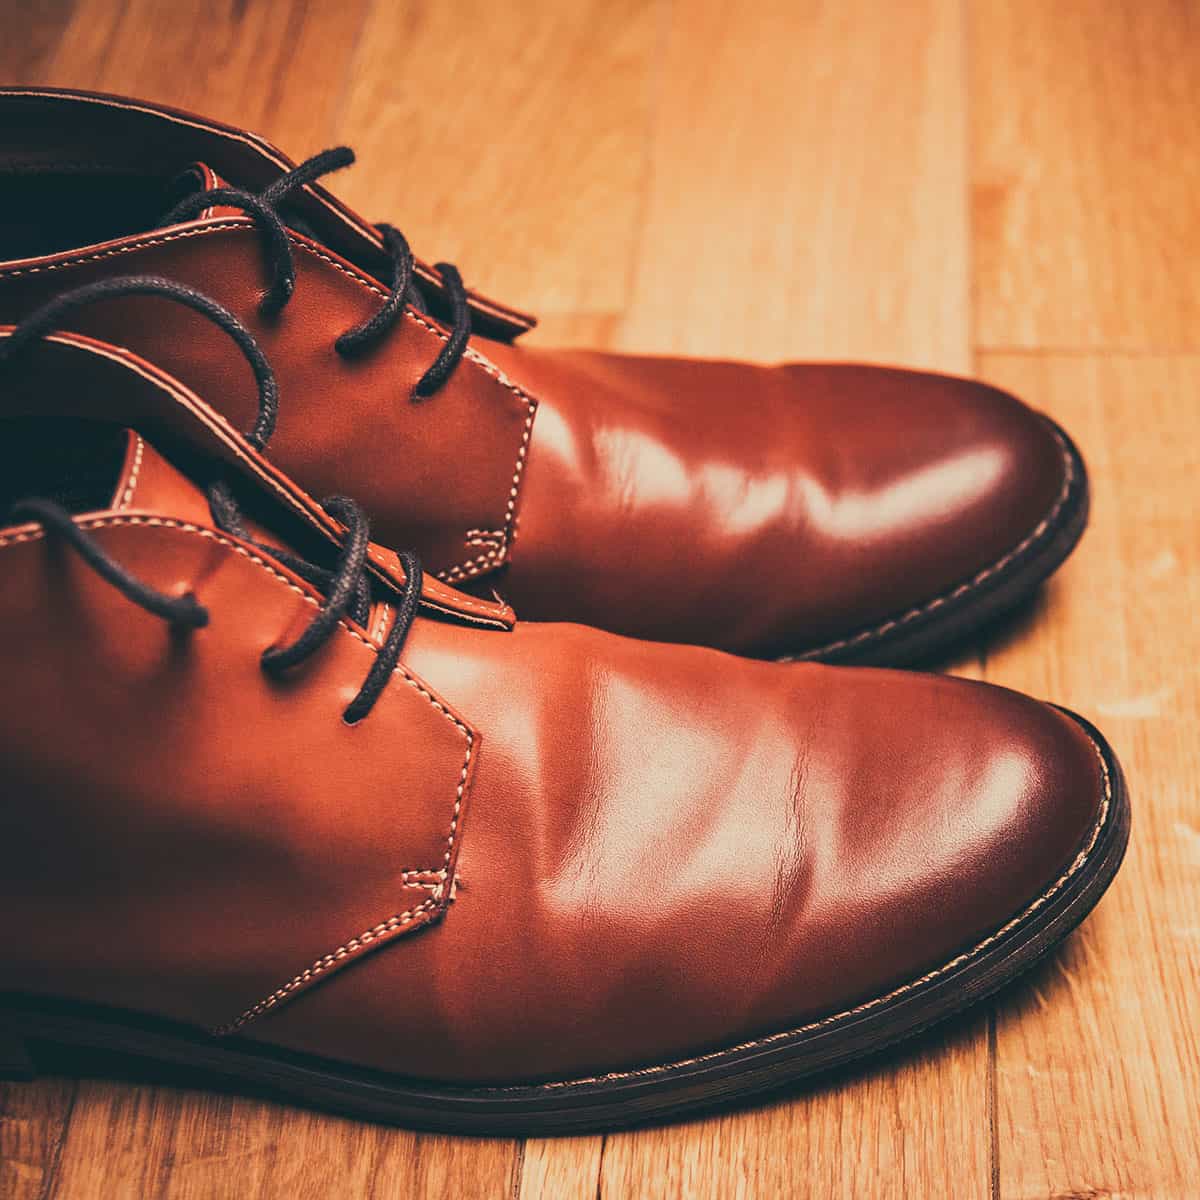 Brown shoes on a wood floor